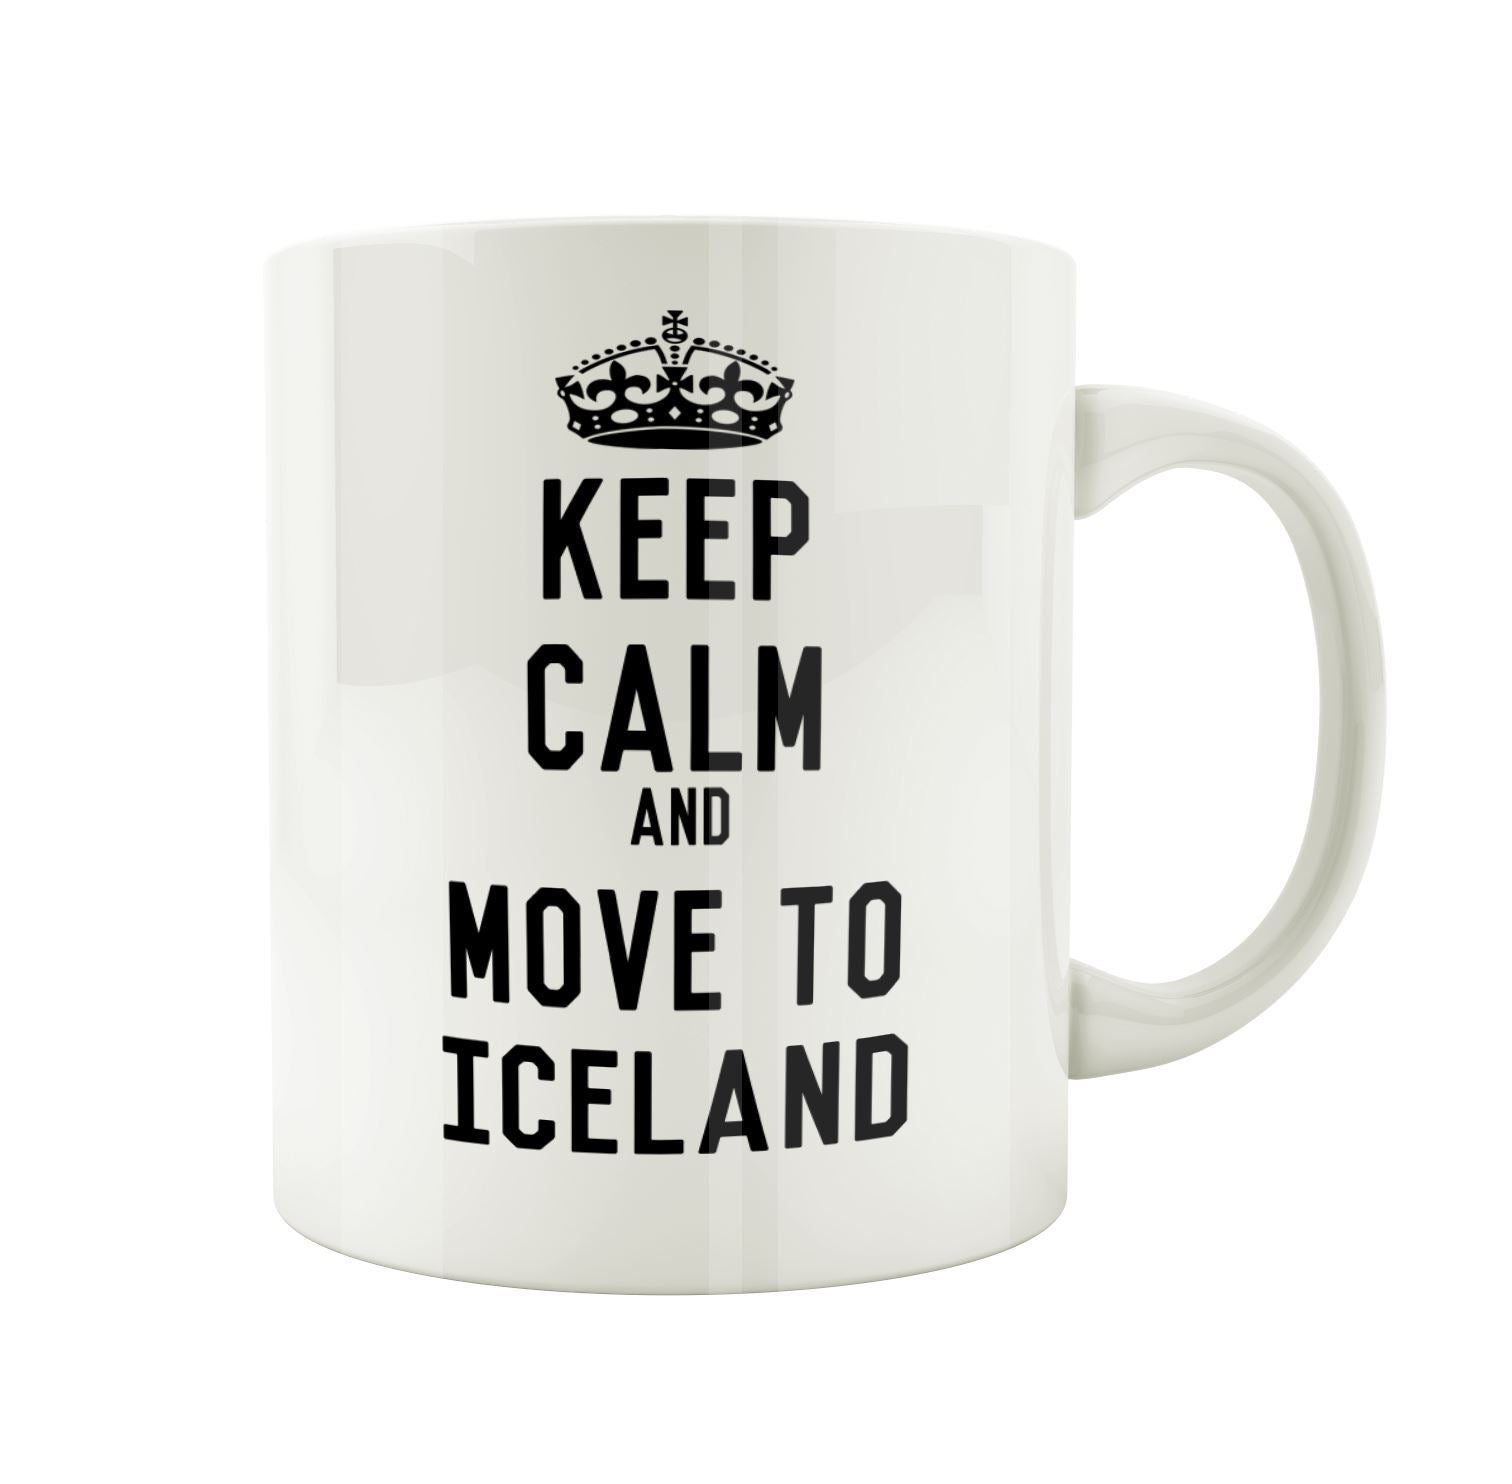 Keep calm and move to iceland